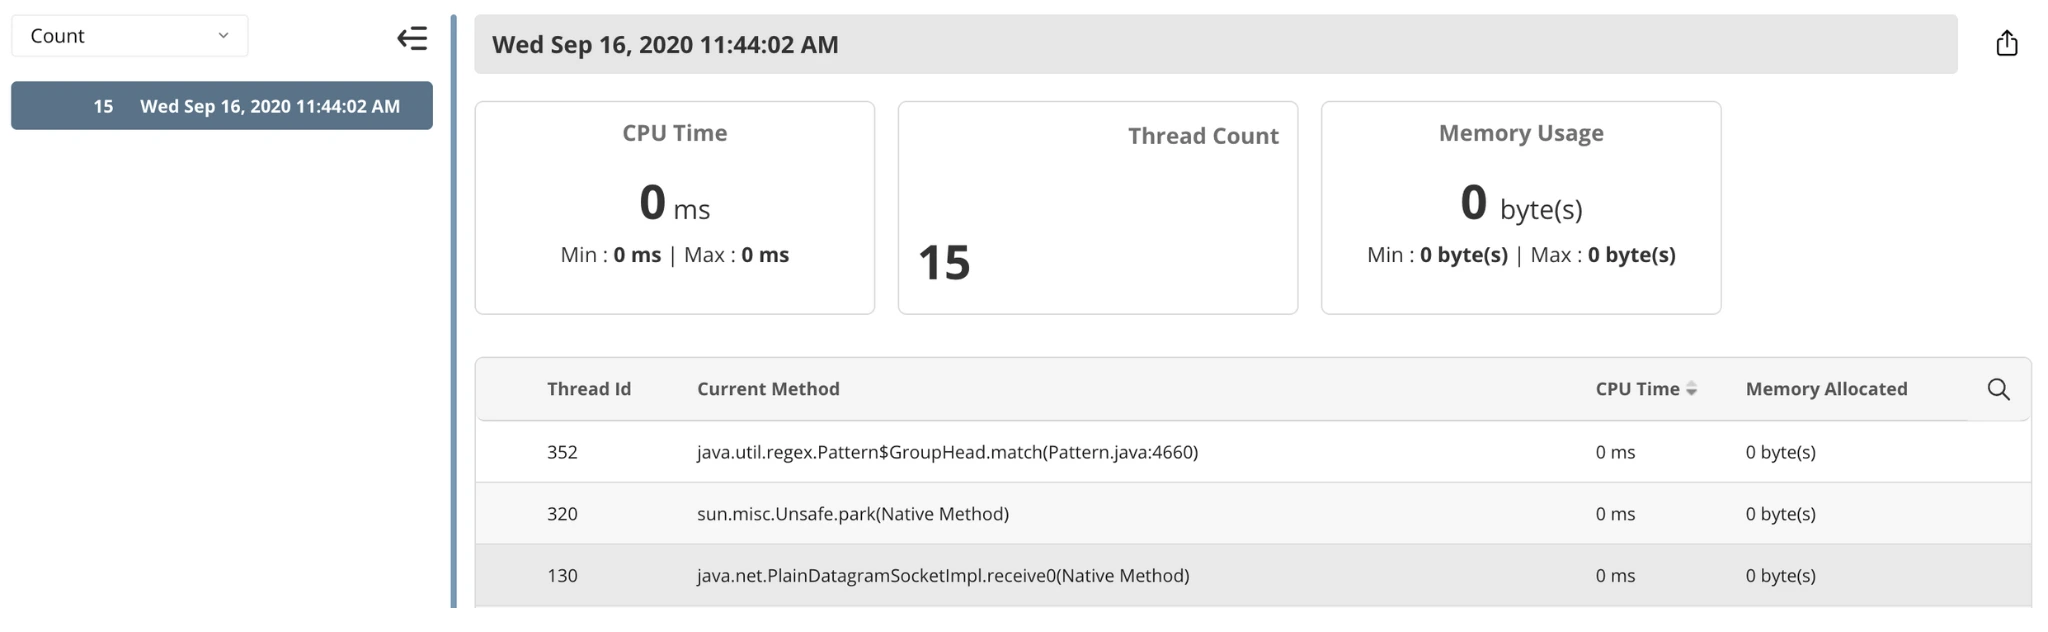 An application performance monitor tool breaksdown each thread to show the ID, method used to call, CPU time, and memory allocated